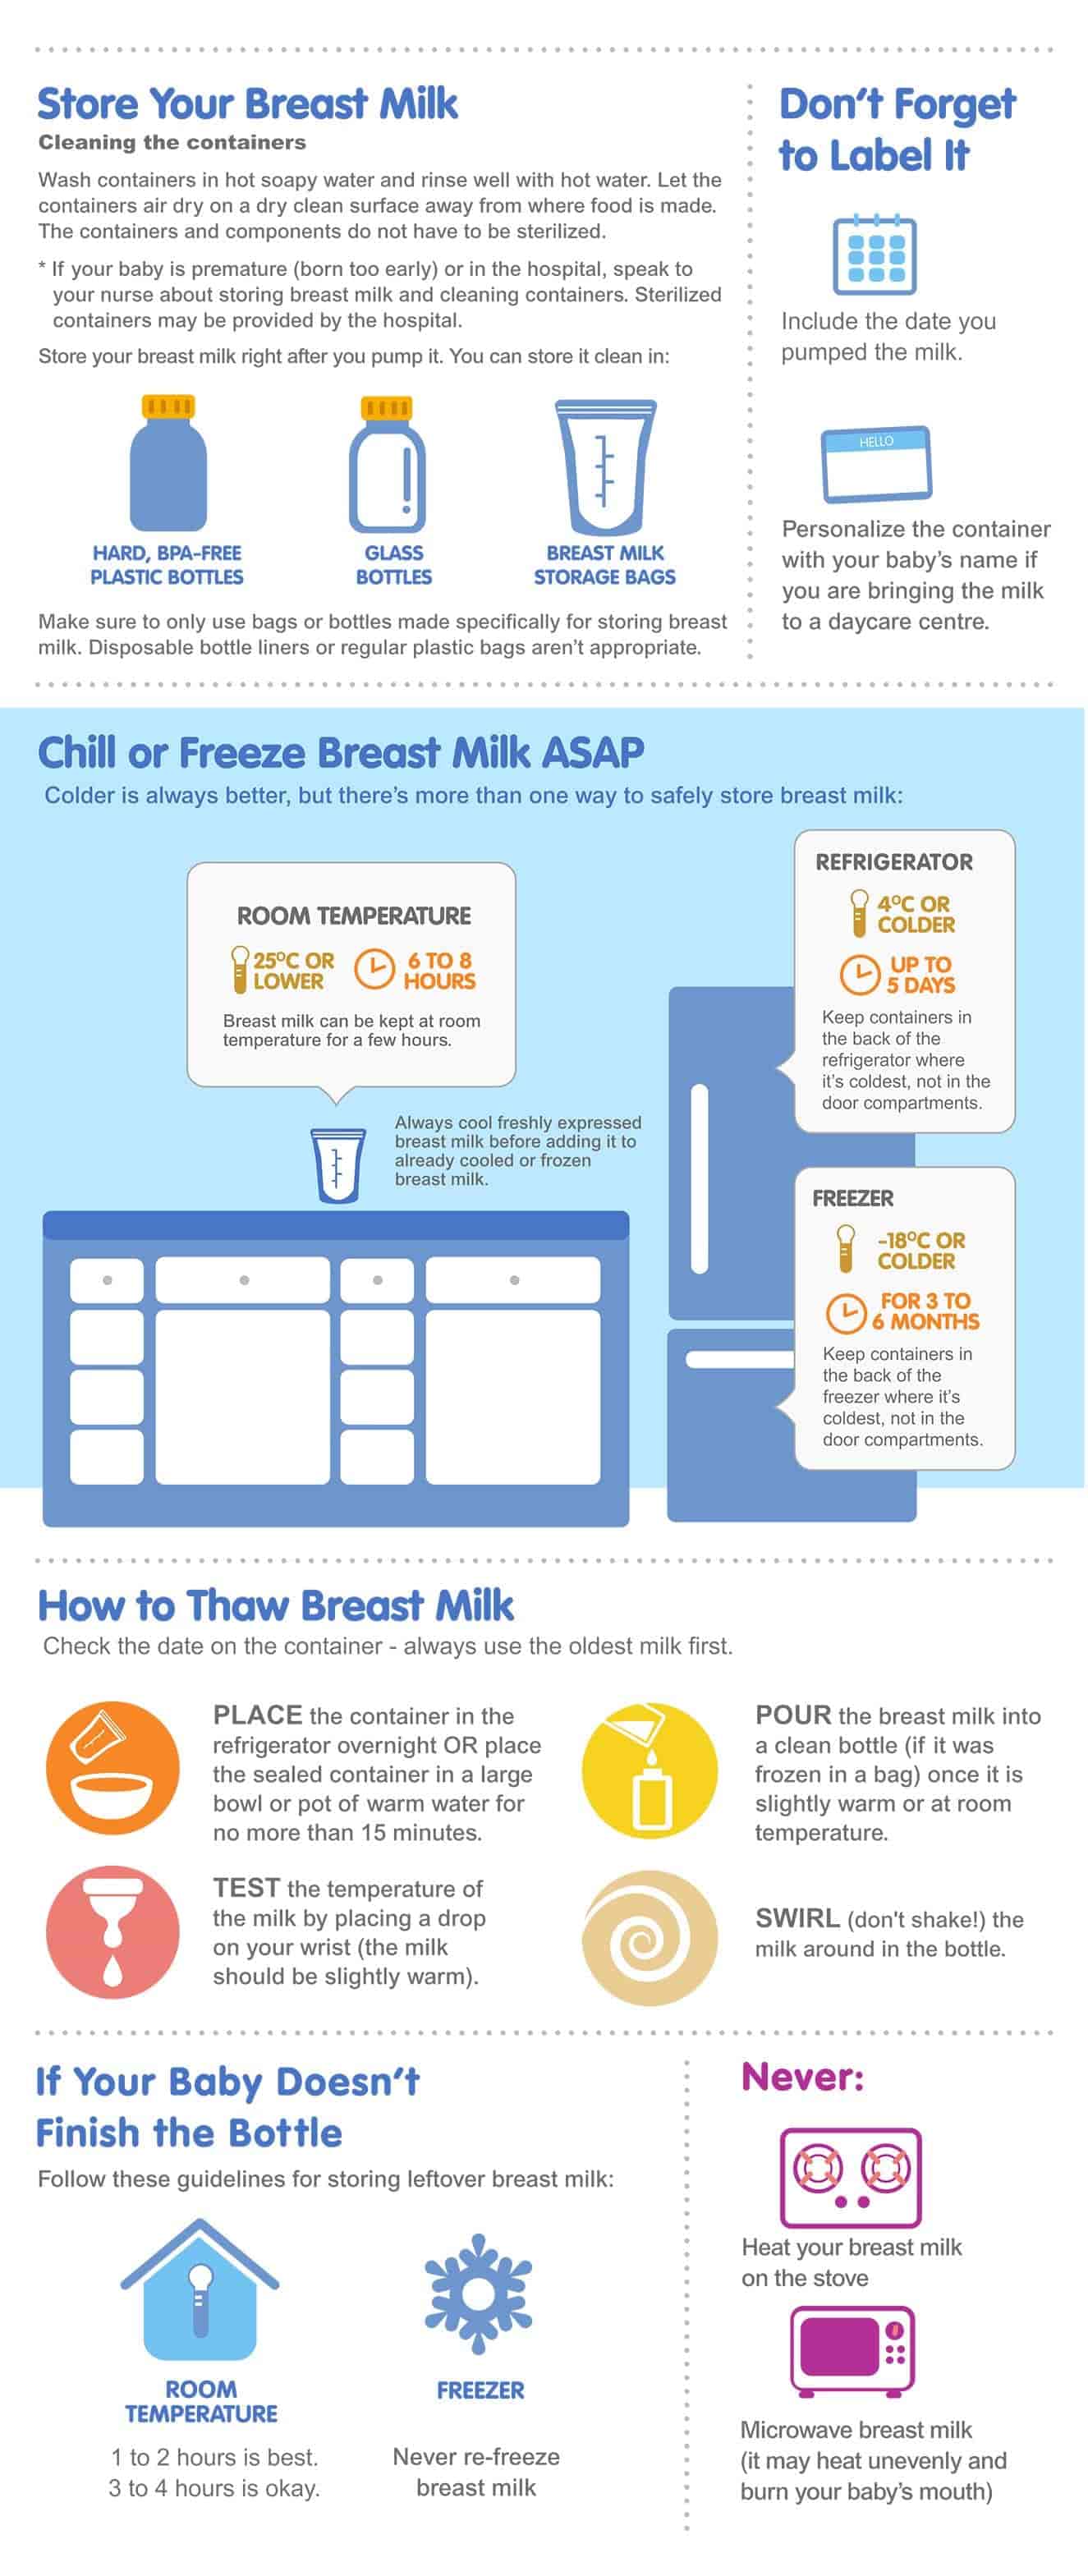 Can you breastfeed and bottle feed expressed milk